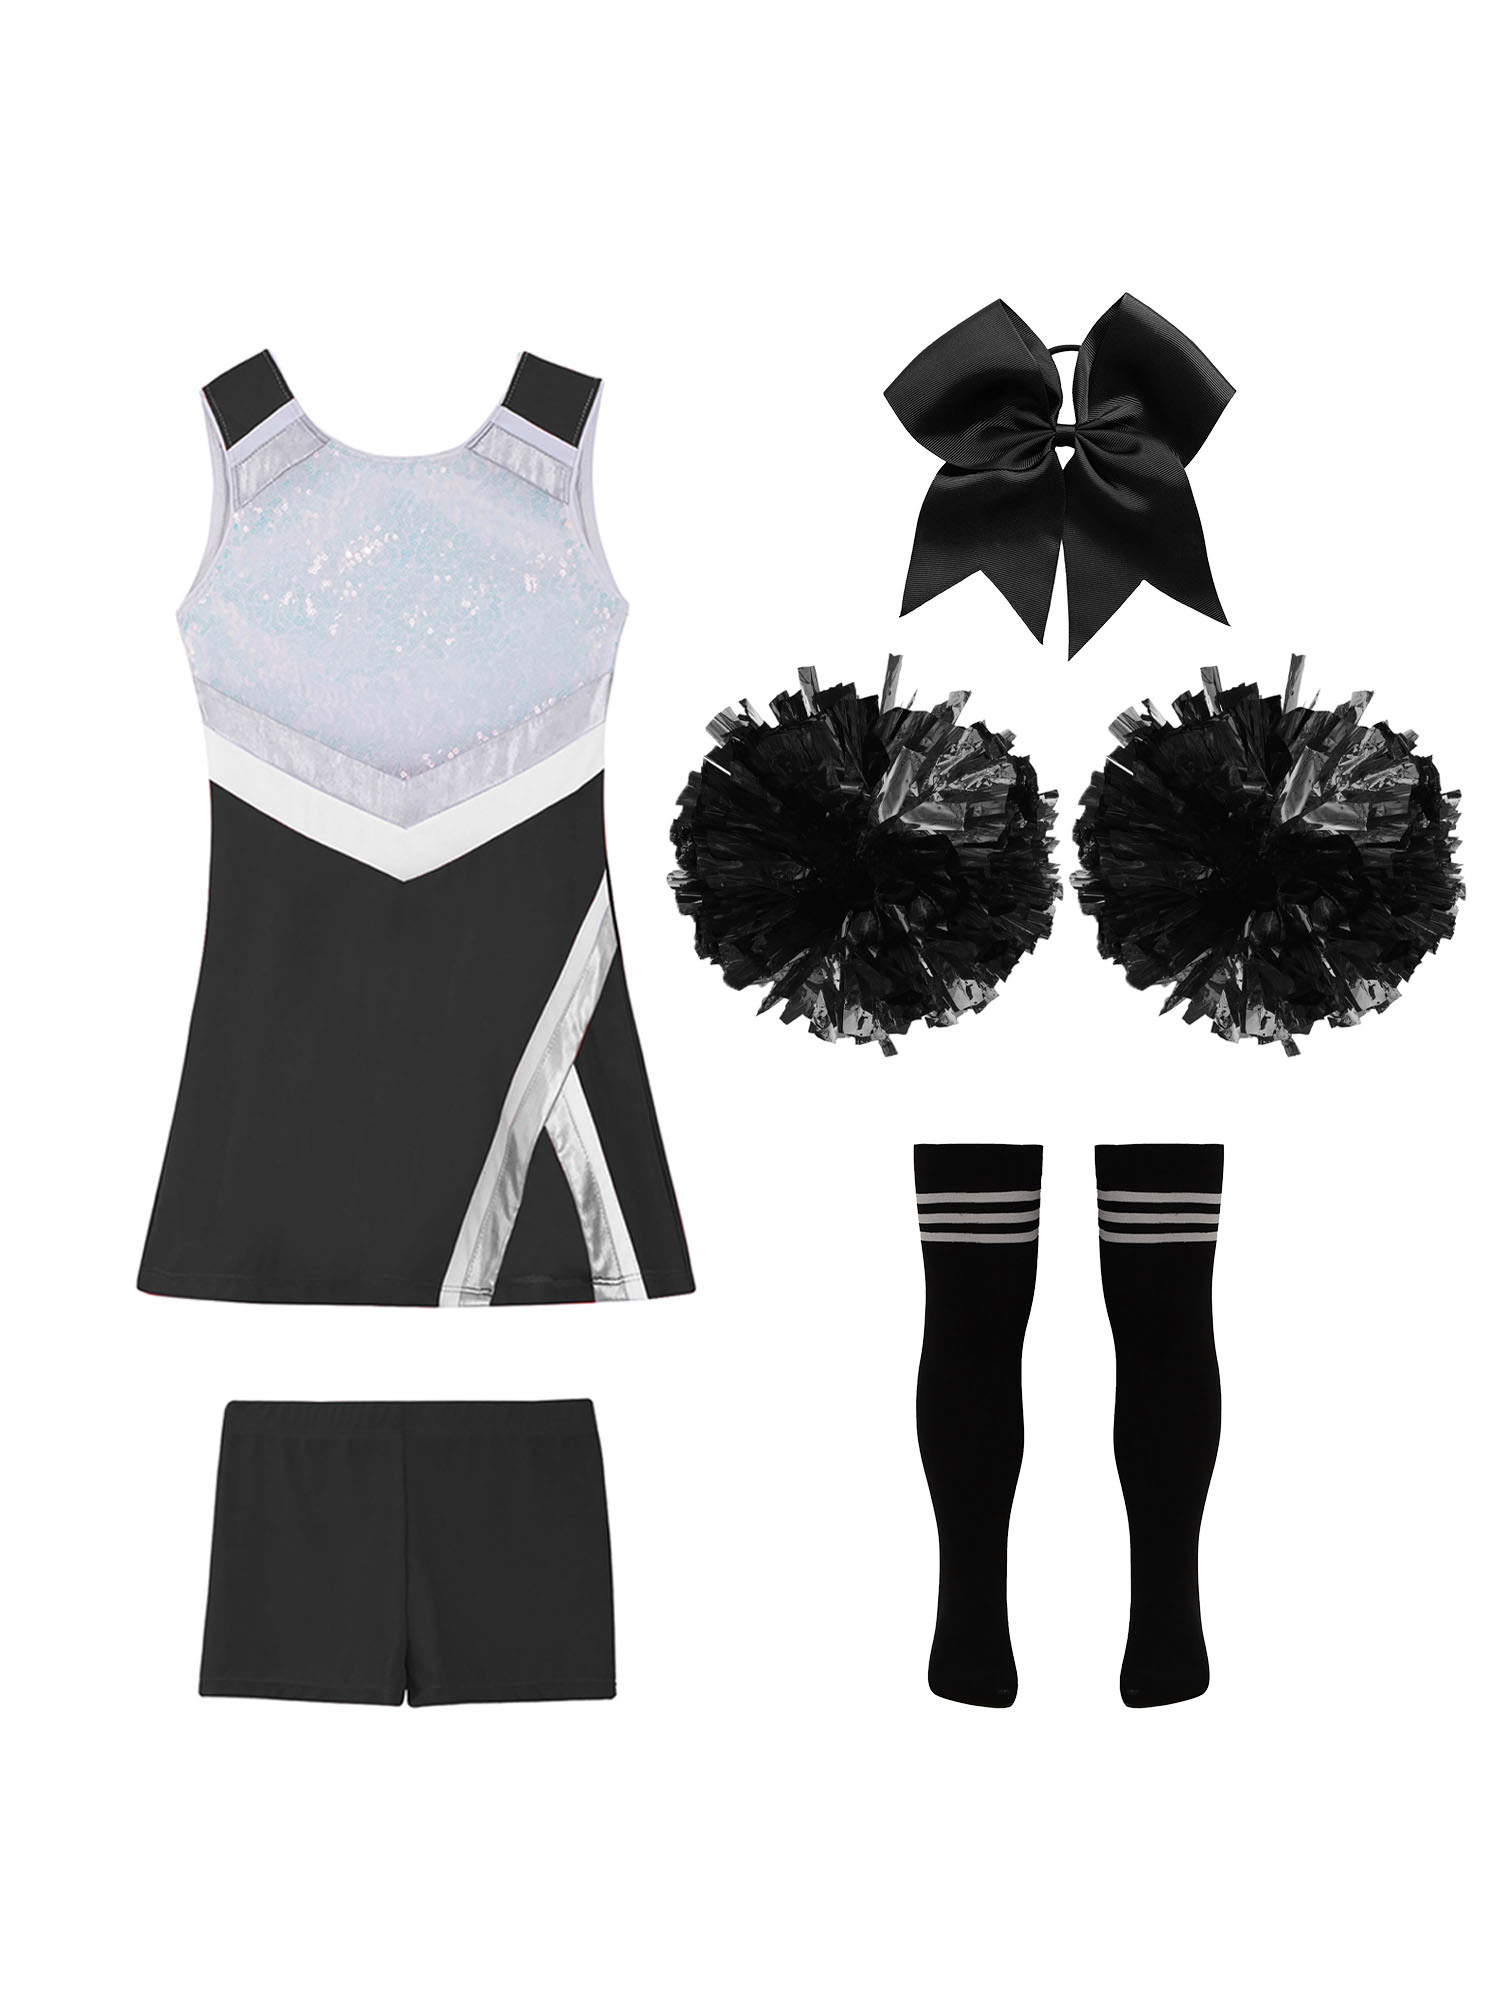 TiaoBug Kids Girls Cheer Leader Uniform Sports Games Cheerleading Dance Outfits Halloween Carnival Fancy Dress Up A Black&White 14 - image 4 of 5